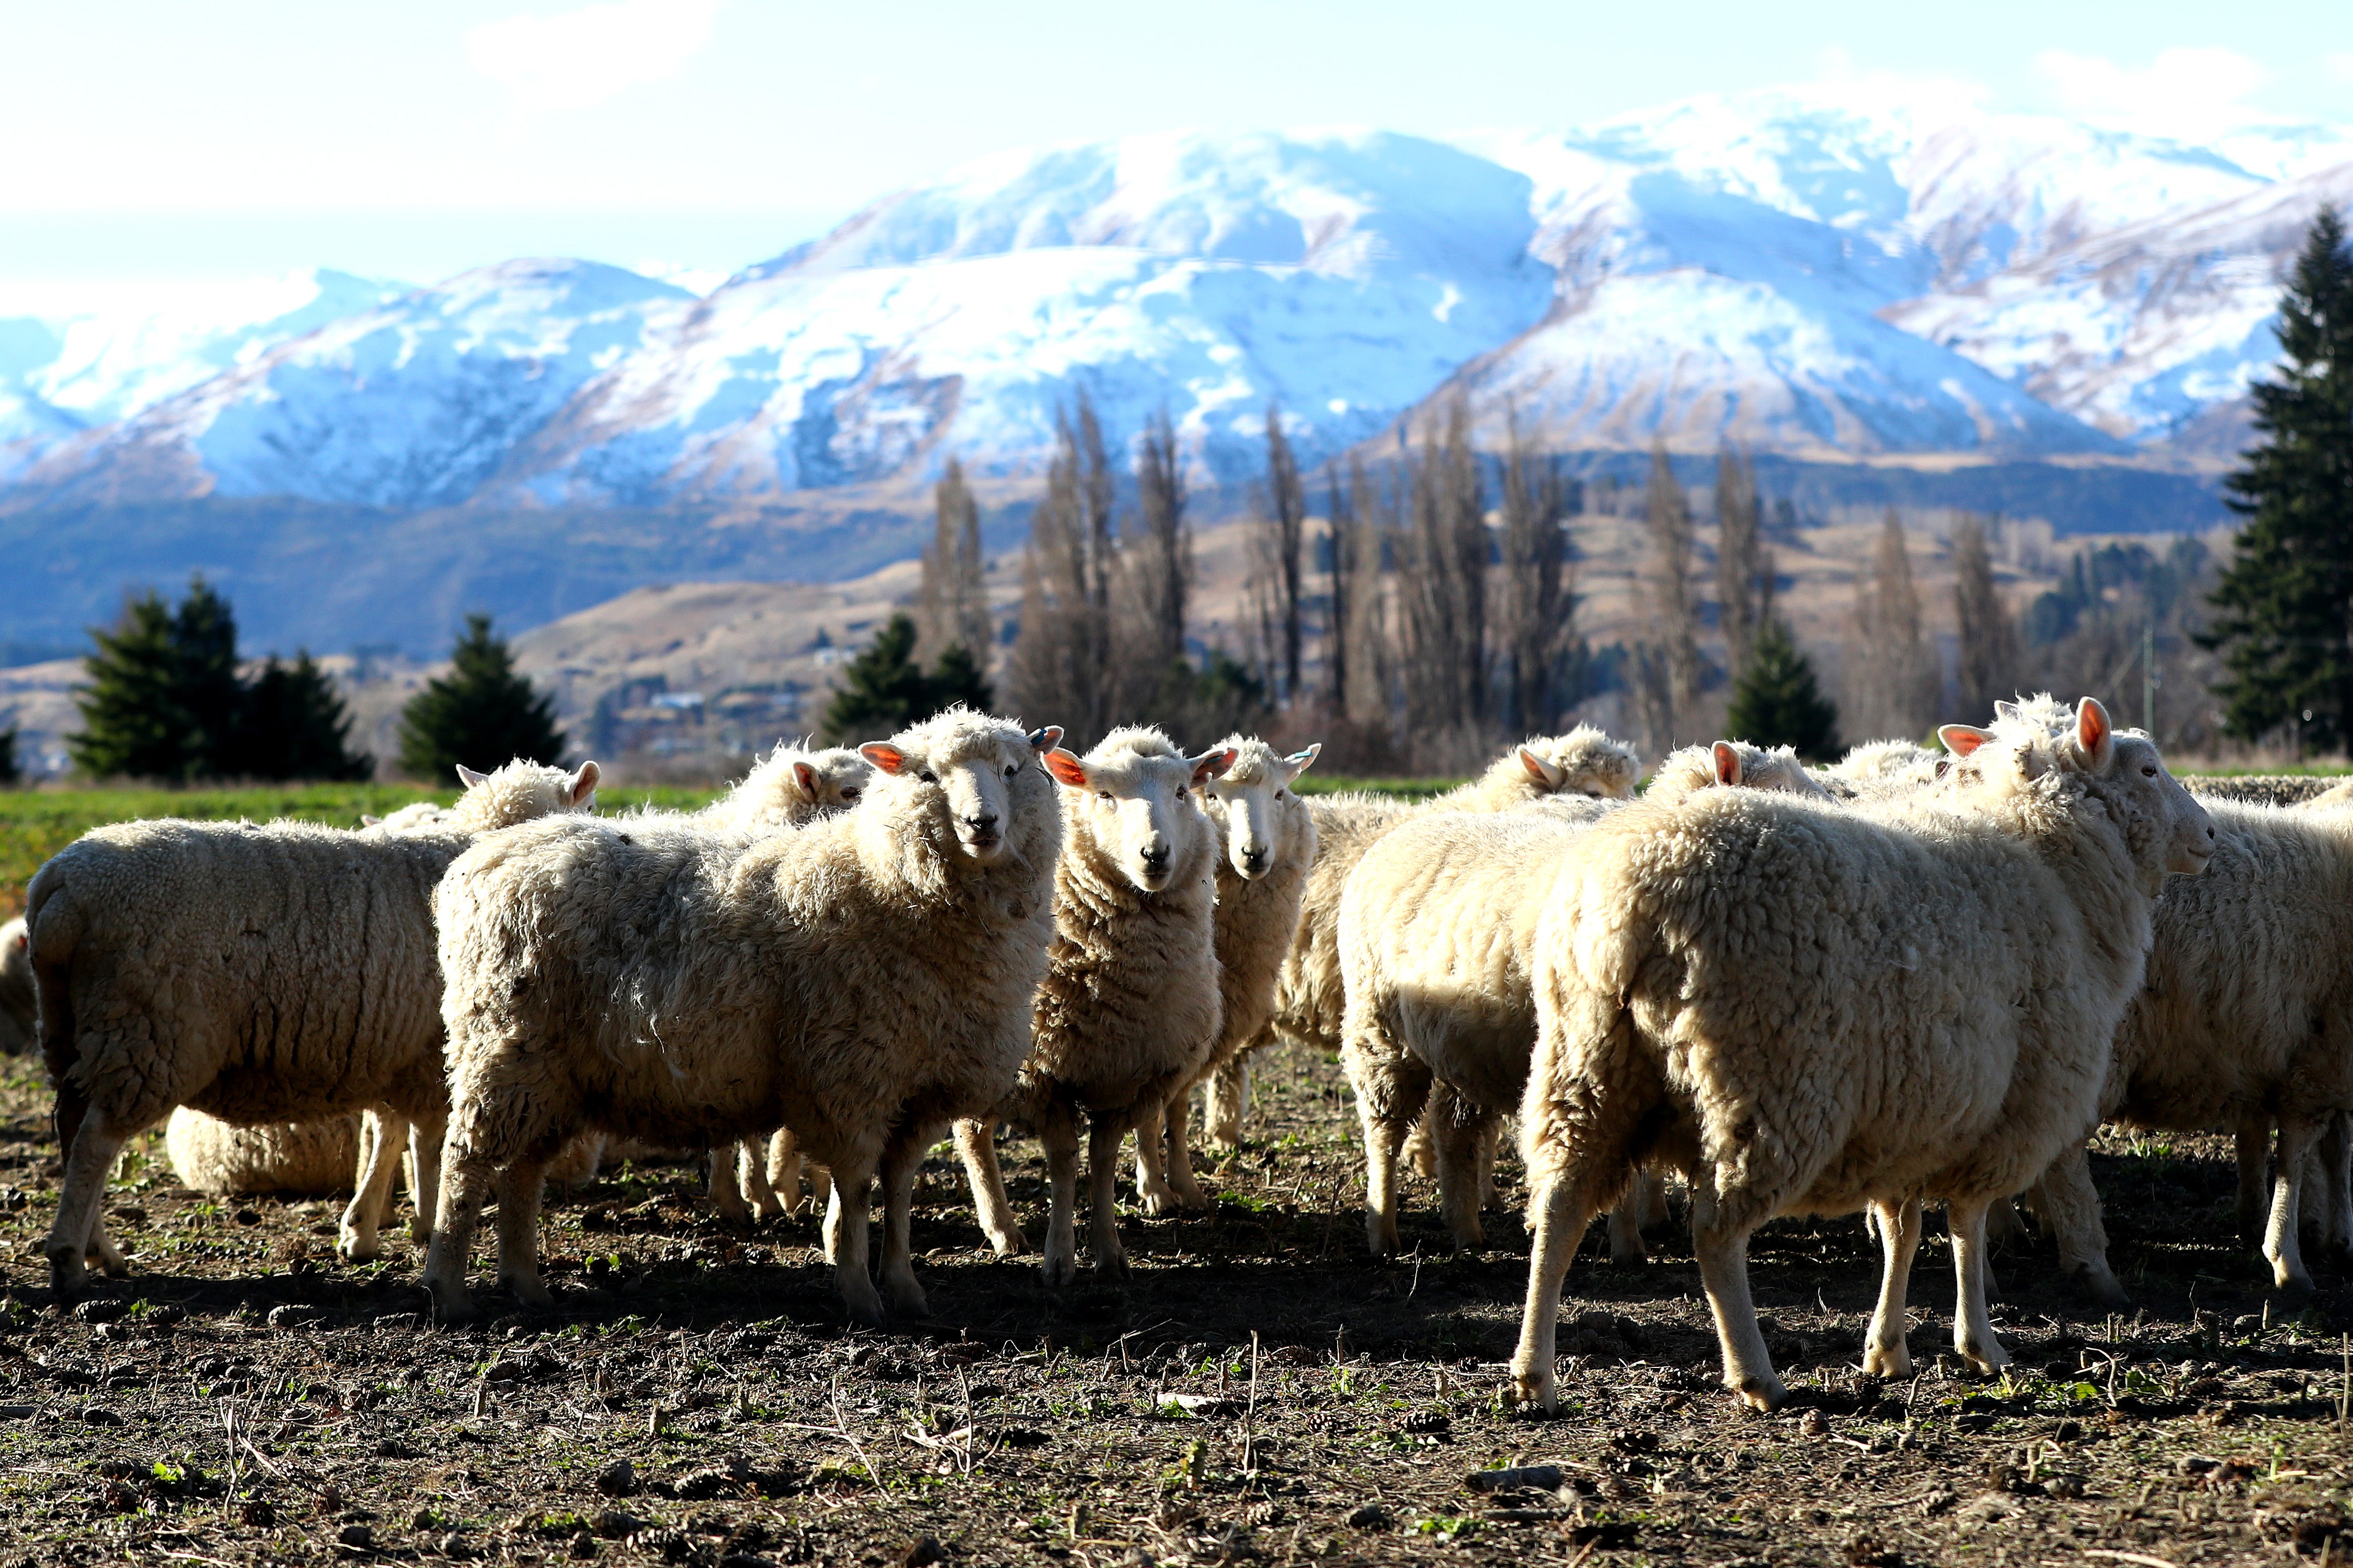 Sheep are seem on farm land at the base of the crown range on 25 June 2020 in Queenstown, New Zealand